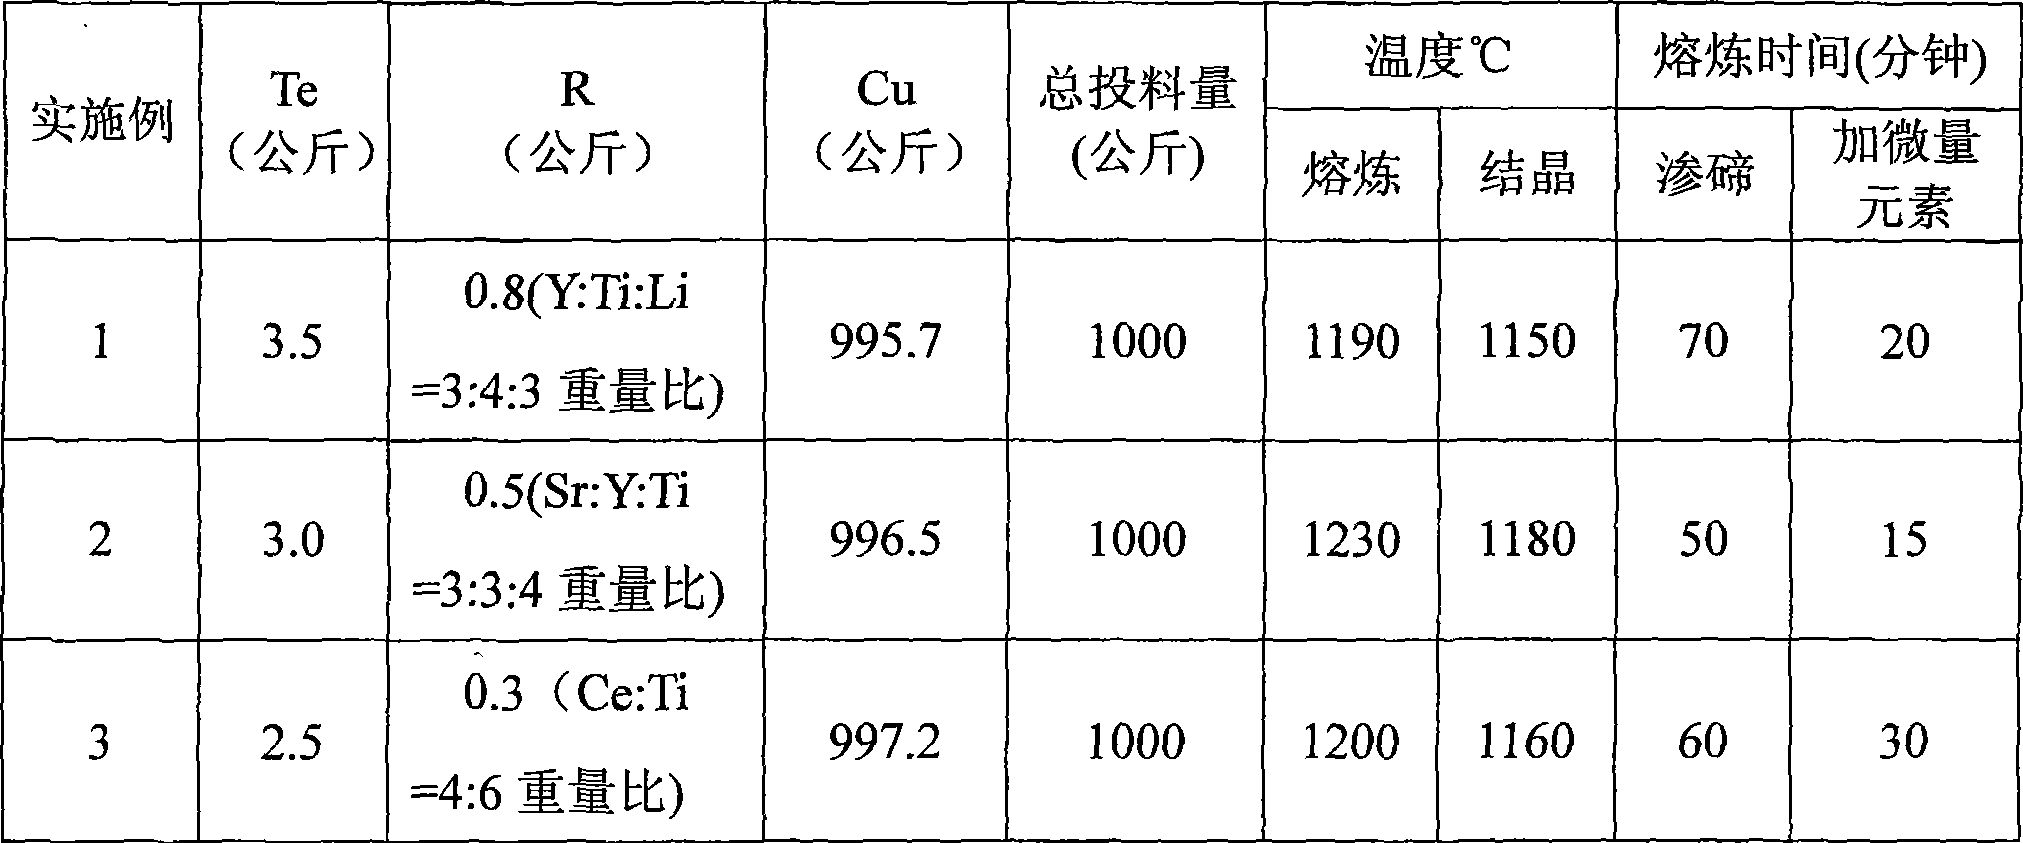 Tellurium copper alloy material for electric power industry and method for producing the same